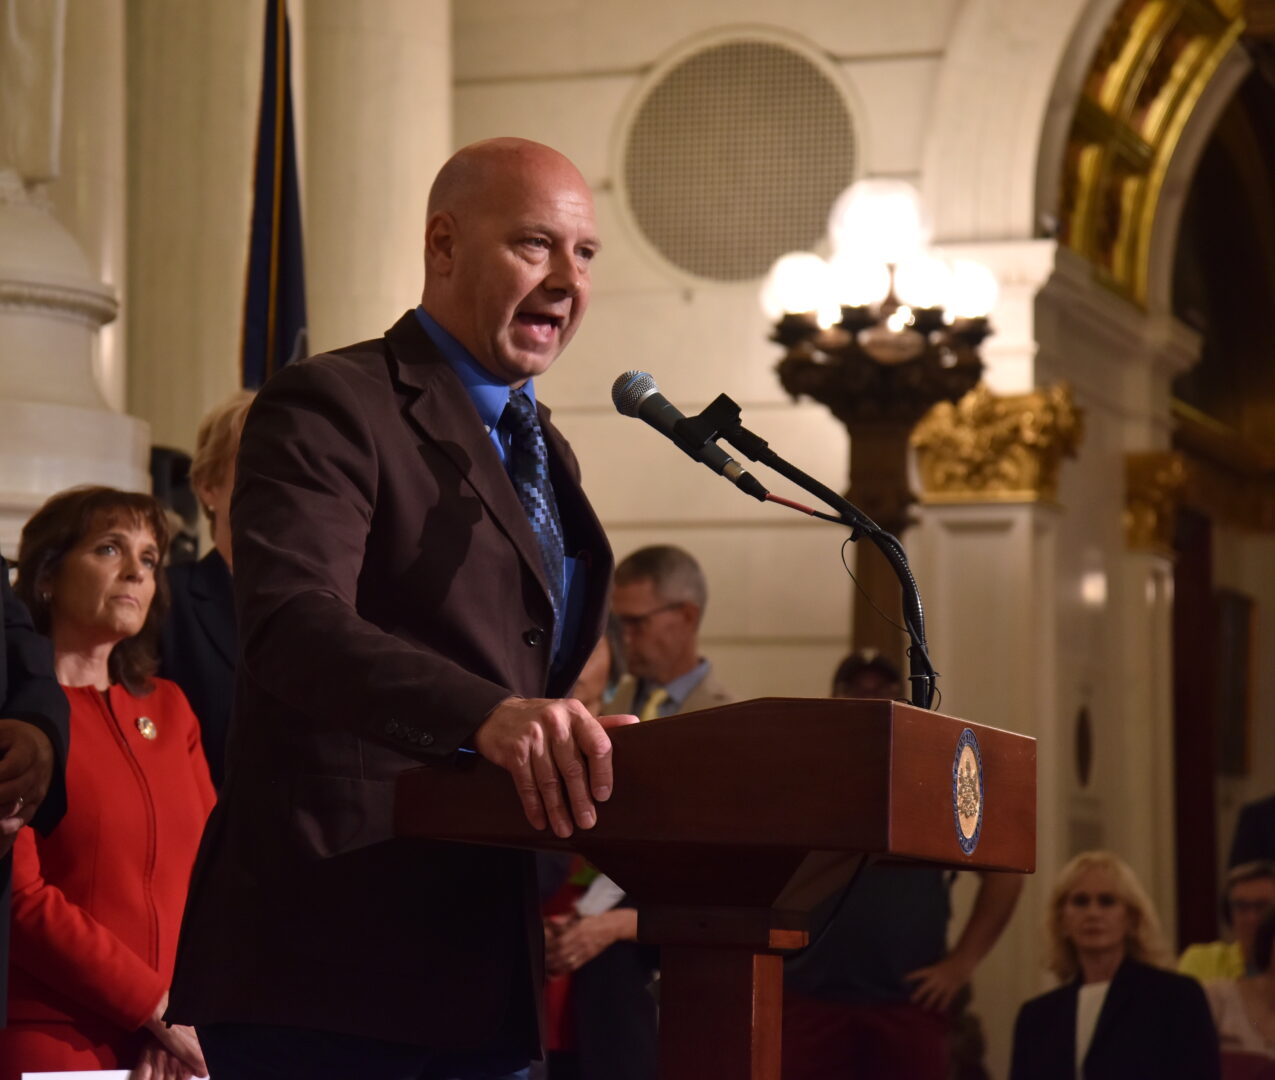 State Sen. Doug Mastriano (R-Franklin), the 2022 Republican candidate for governor, addresses a crowd gathered for a rally celebrating William Penn in the state Capitol rotunda in Harrisburg on July 1, 2022. 